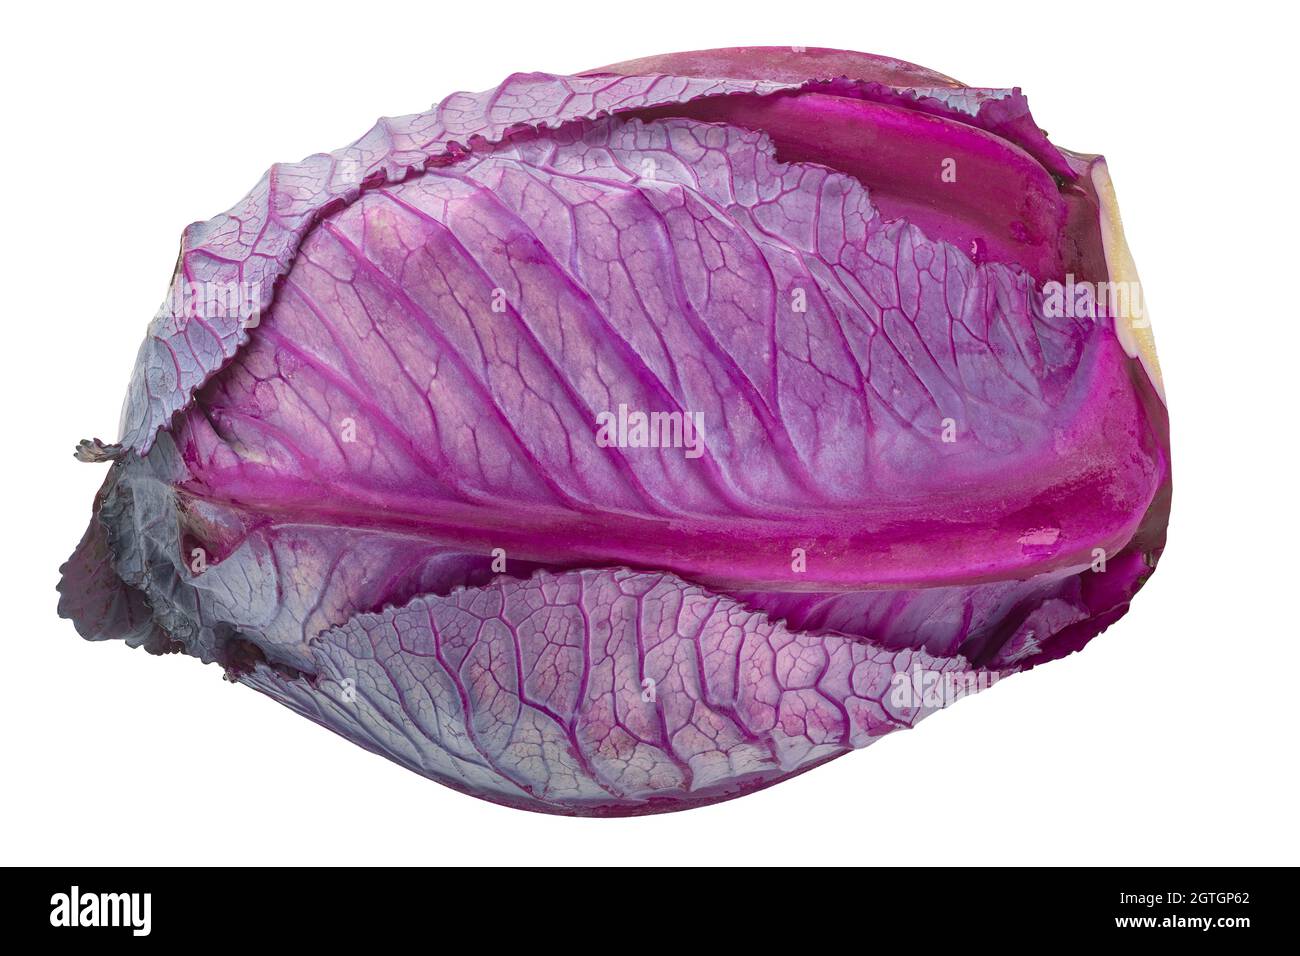 Red cabbage, anthocyanin-rich leafy vegetable (Brassica oleracea) isolated Stock Photo